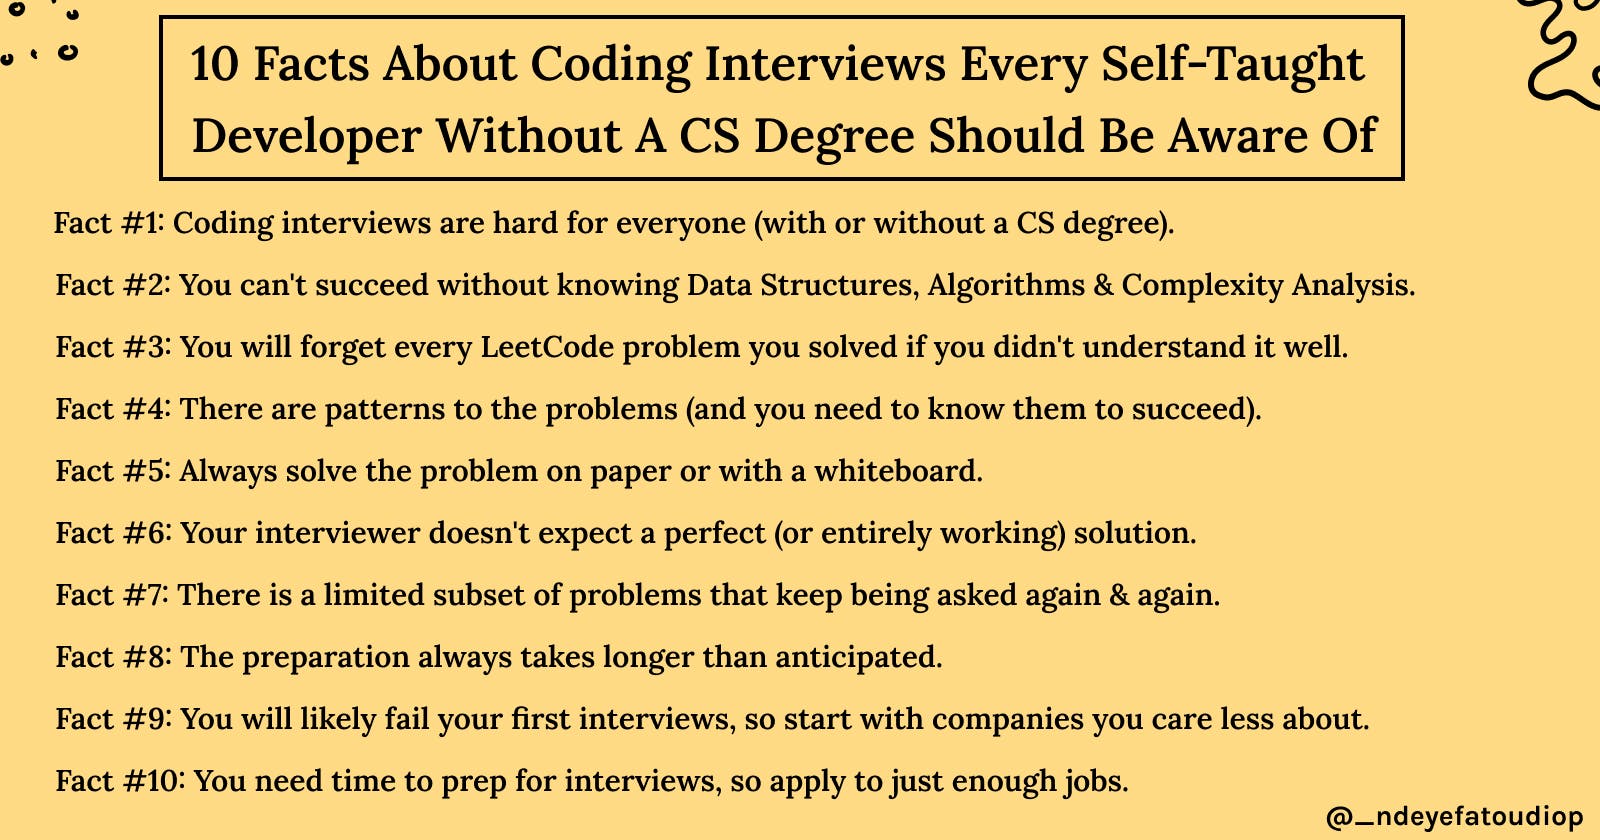 10 Facts About Coding Interviews Every Self-Taught Developer Without A CS Degree Should Be Aware Of ✨